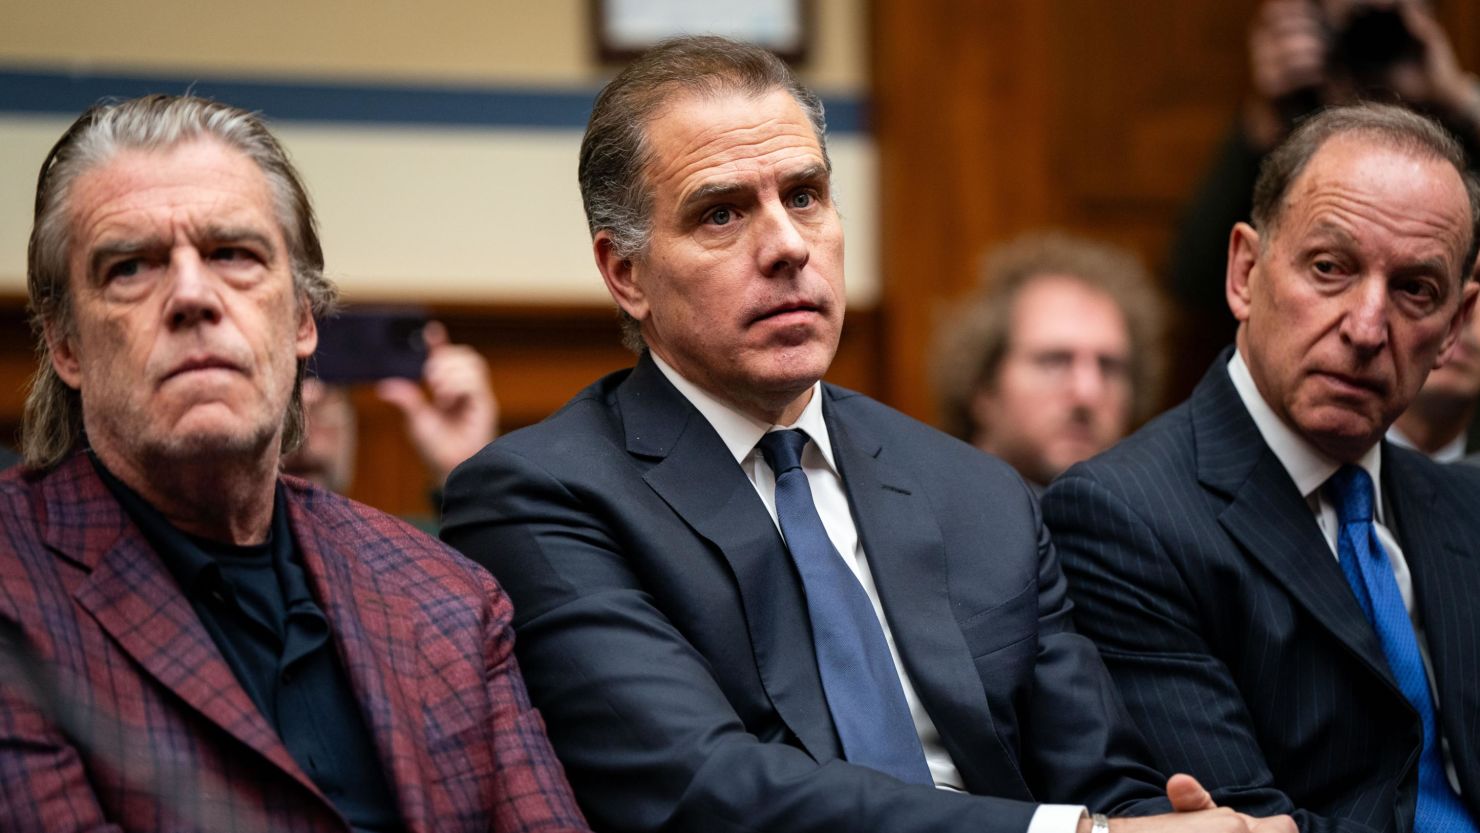 Hunter Biden Pleads Not Guilty To Nine Federal Tax Charges: Latest Updates